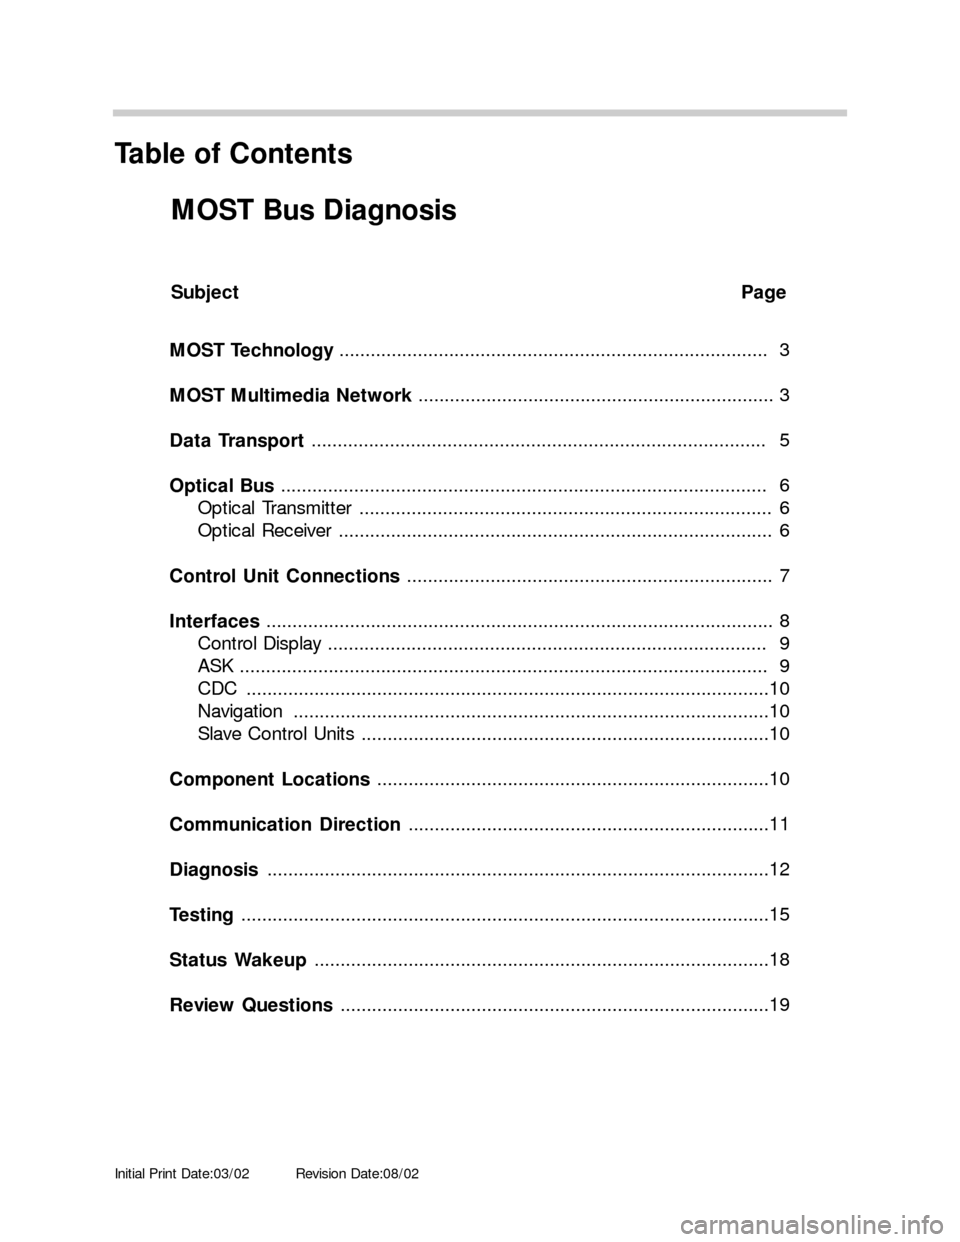 BMW 7 SERIES LONG 2005 E66 MOST Bus Diagnosis Workshop Manual Initial Print Date:03/02Revision Date:08/02
Subject Page
MOST Technology ..................................................................................  3
MOST Multimedia Network .................